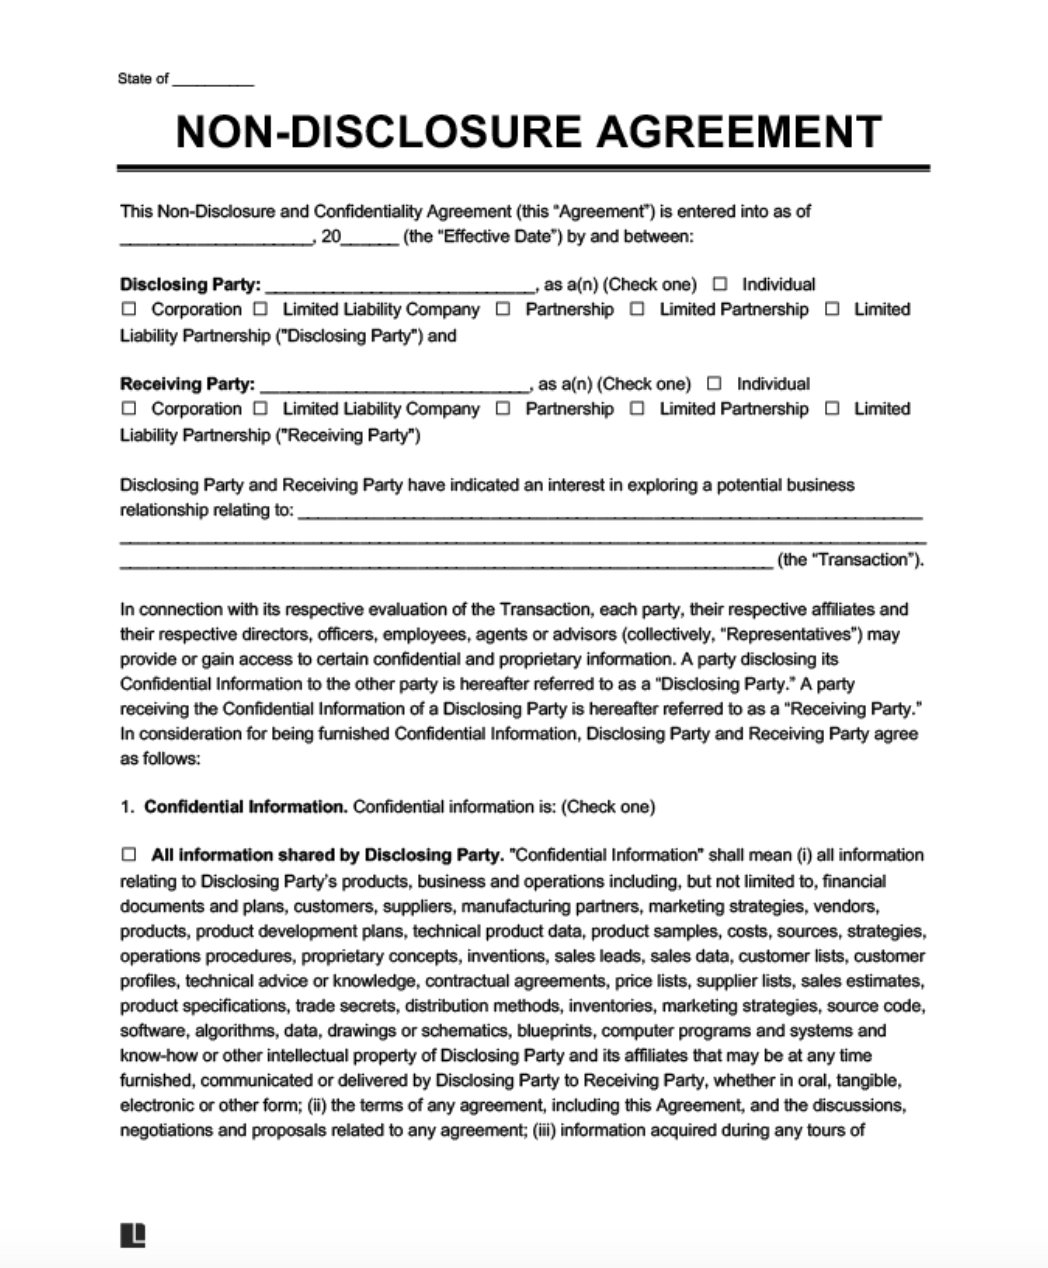 Word Non-Disclosure Agreement Template by LegalTemplates